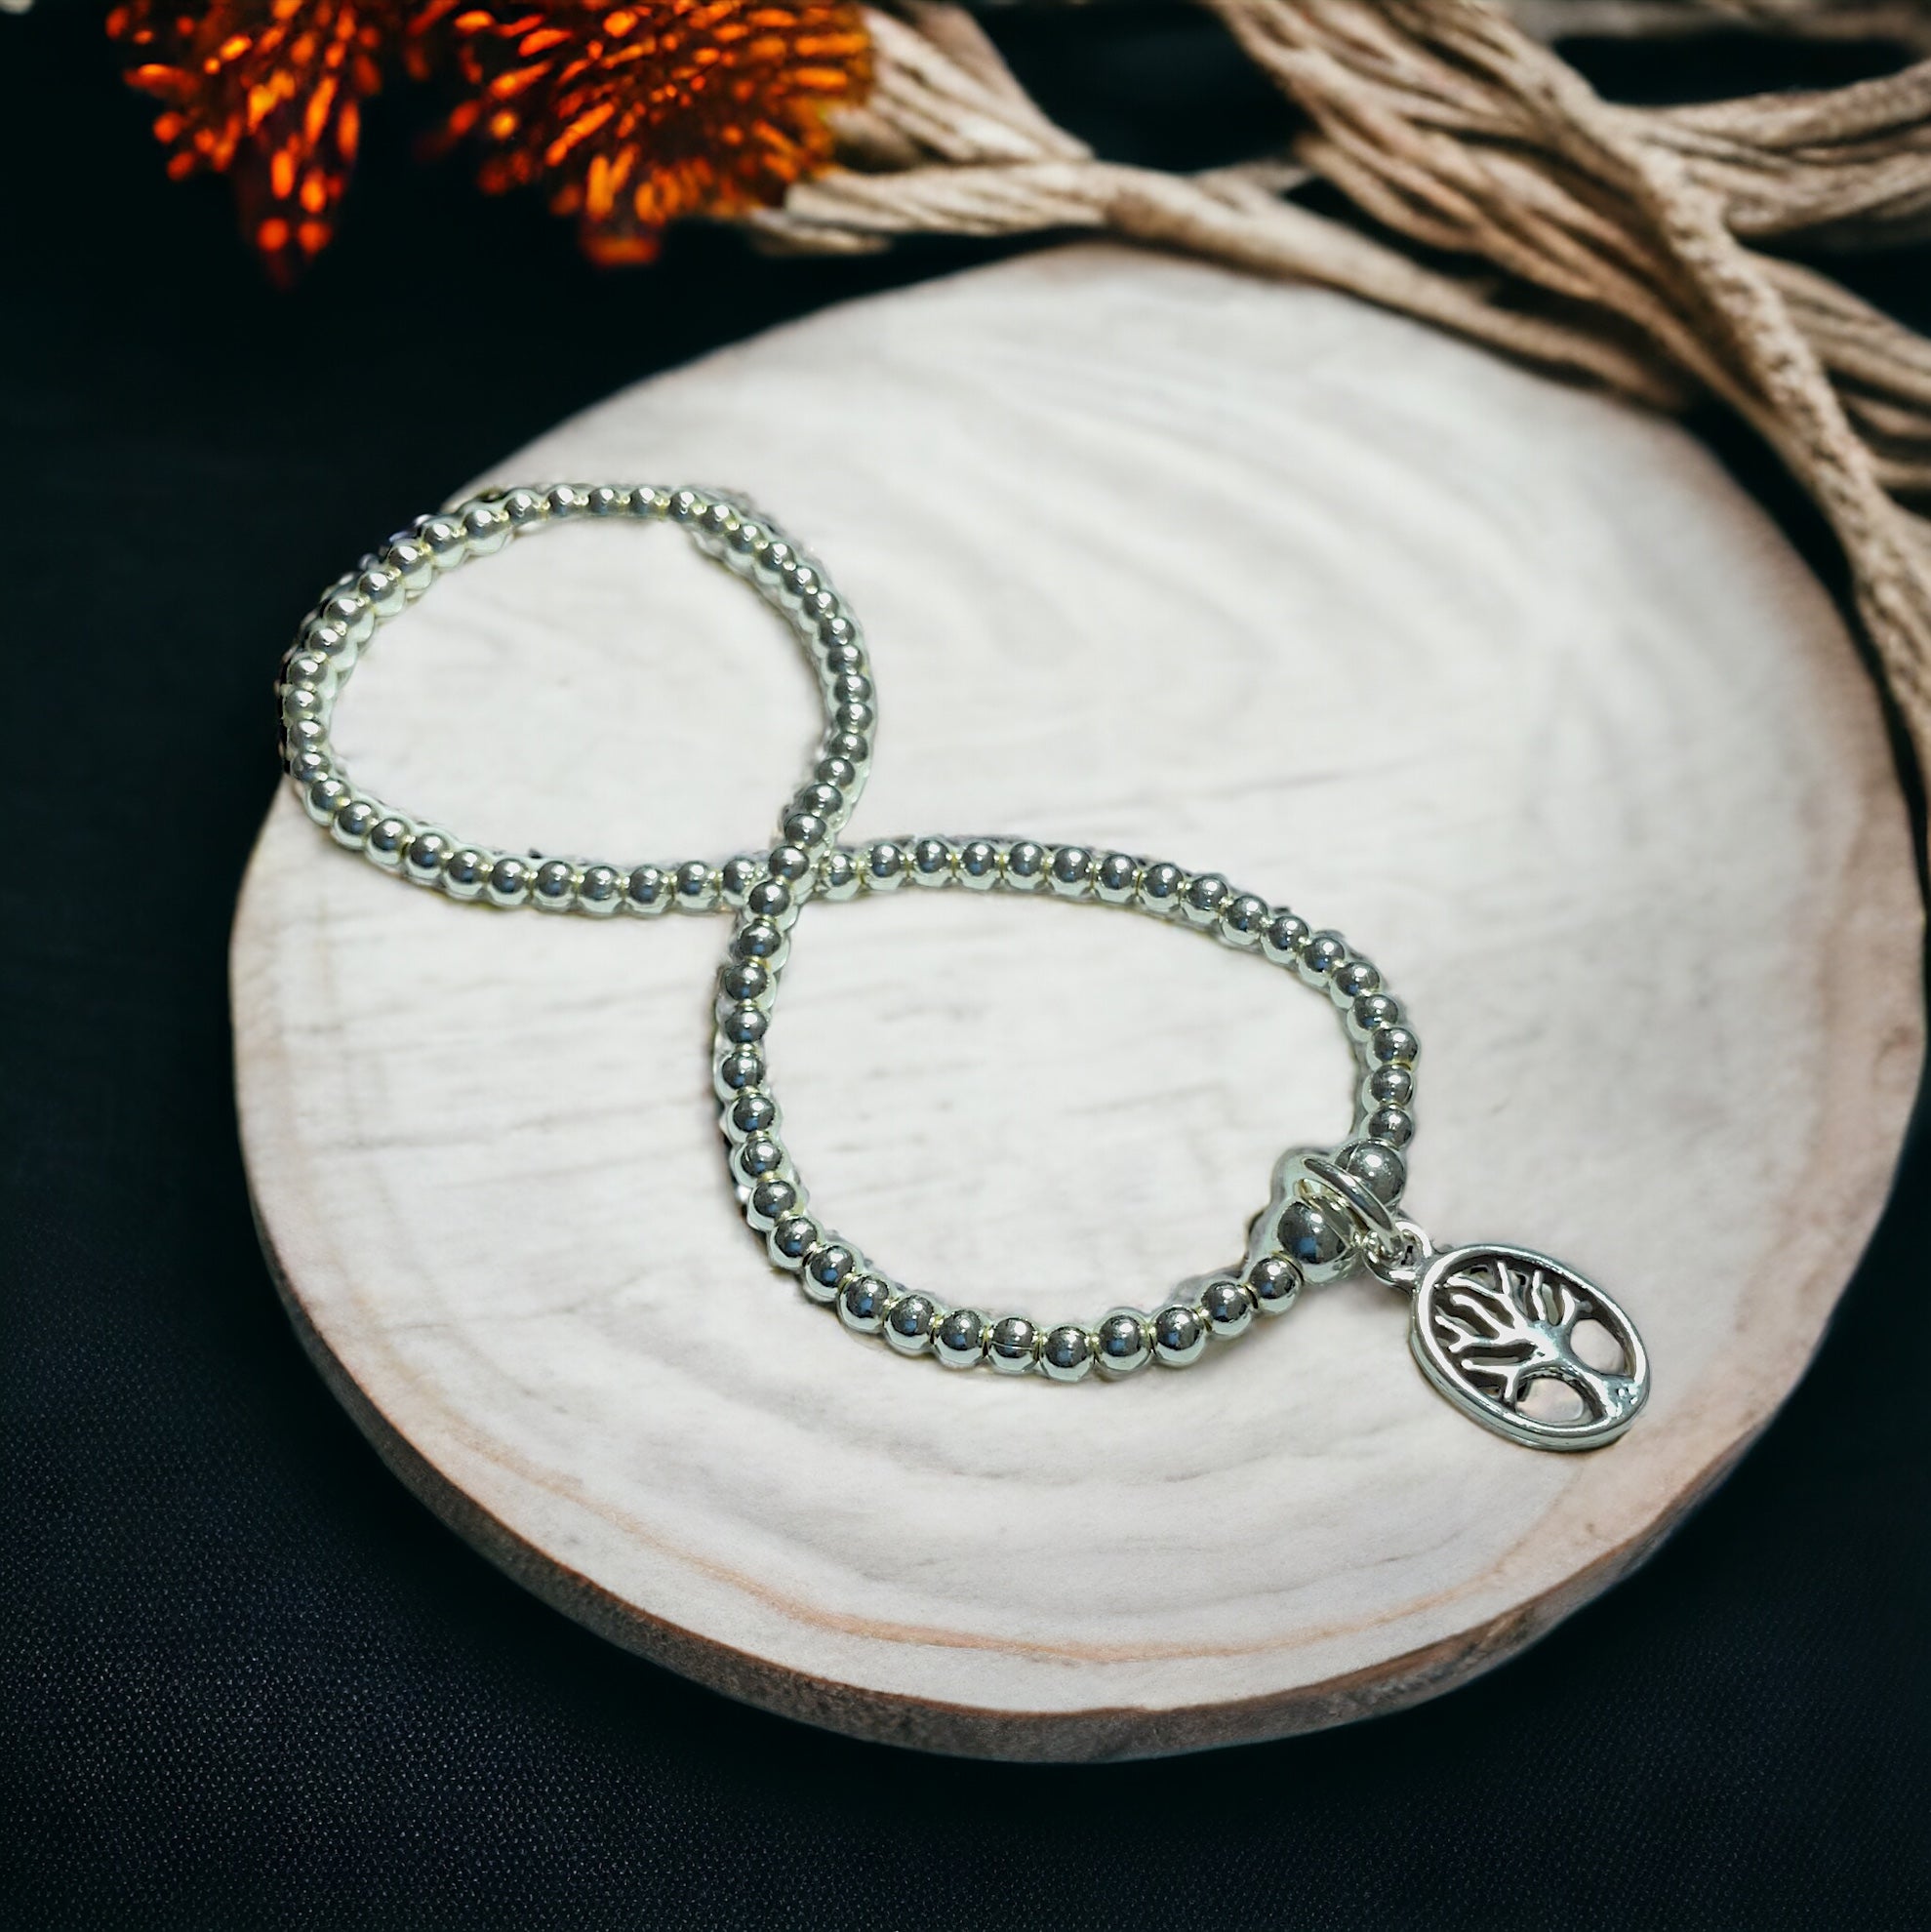 a beaded bracelet with a tree of life charm